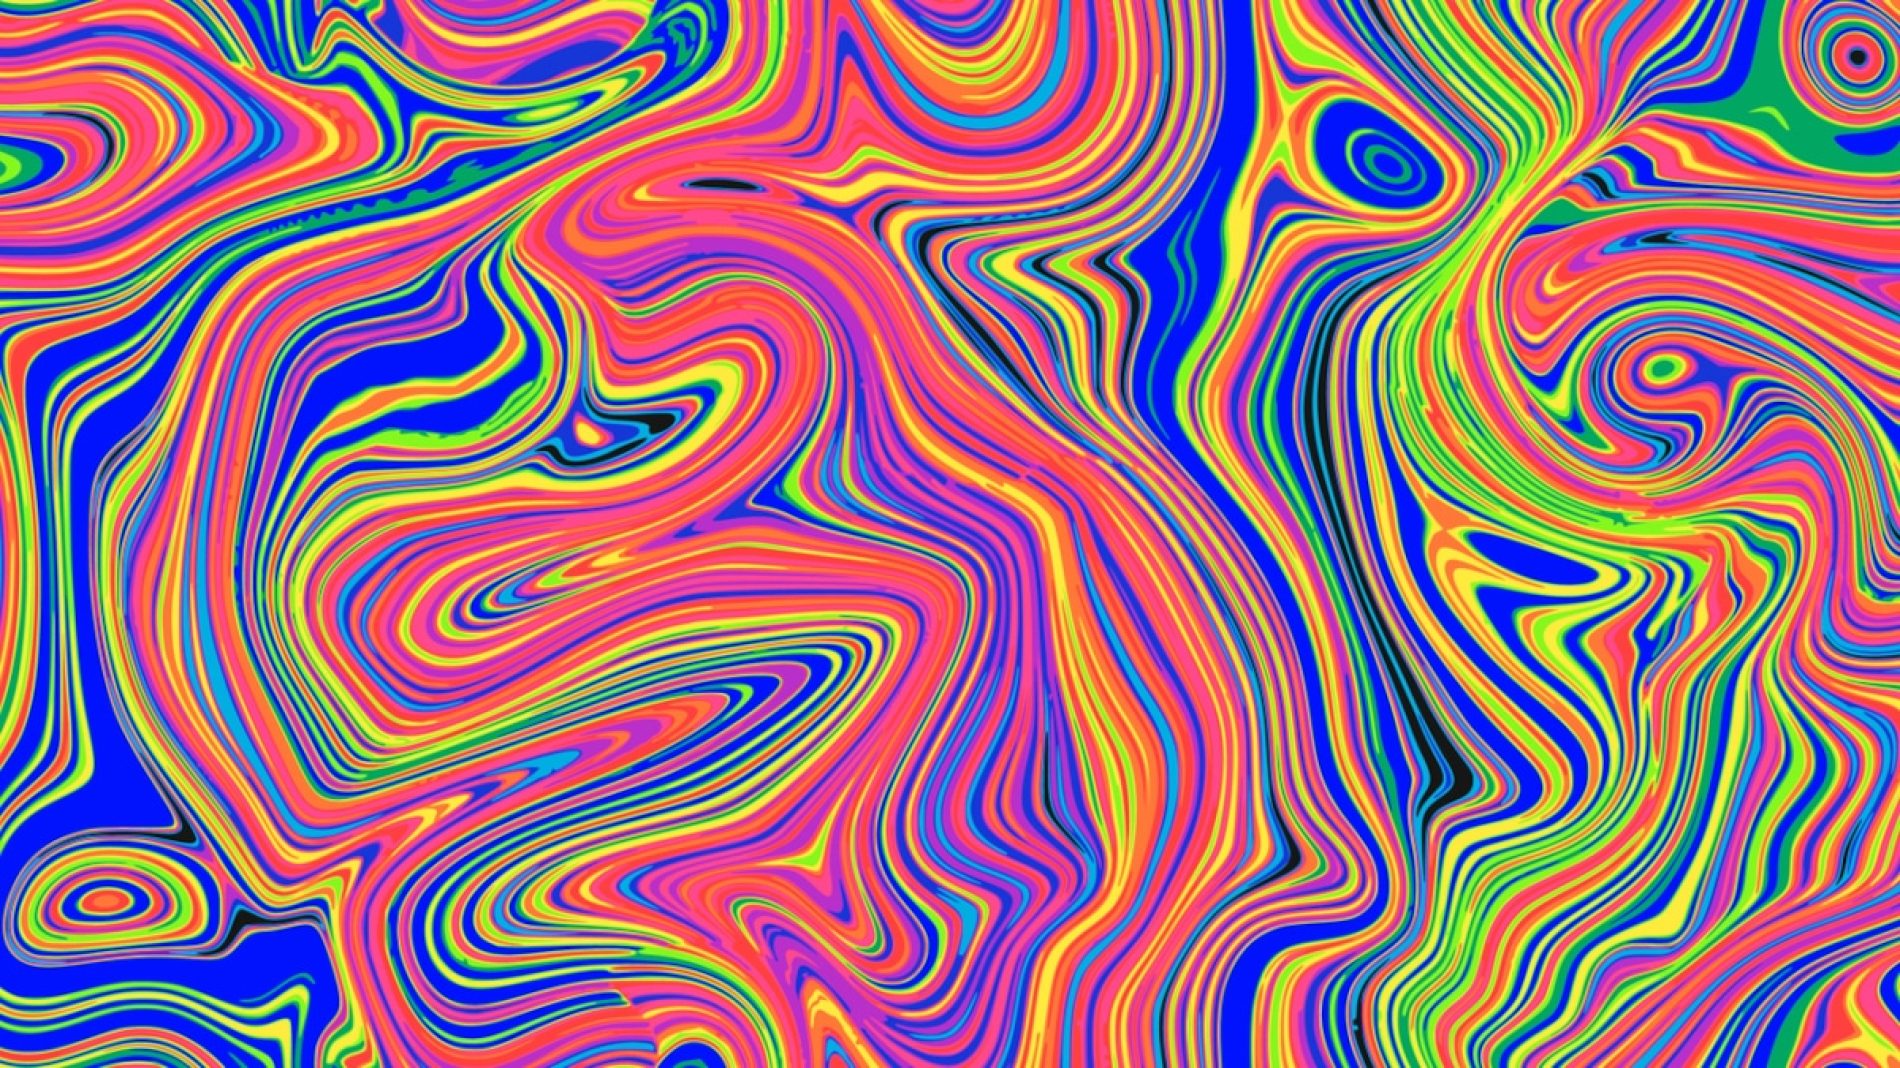 Colourful psychedelic swirling patterns to represent effects of LSD (acid) and experience of acid trip